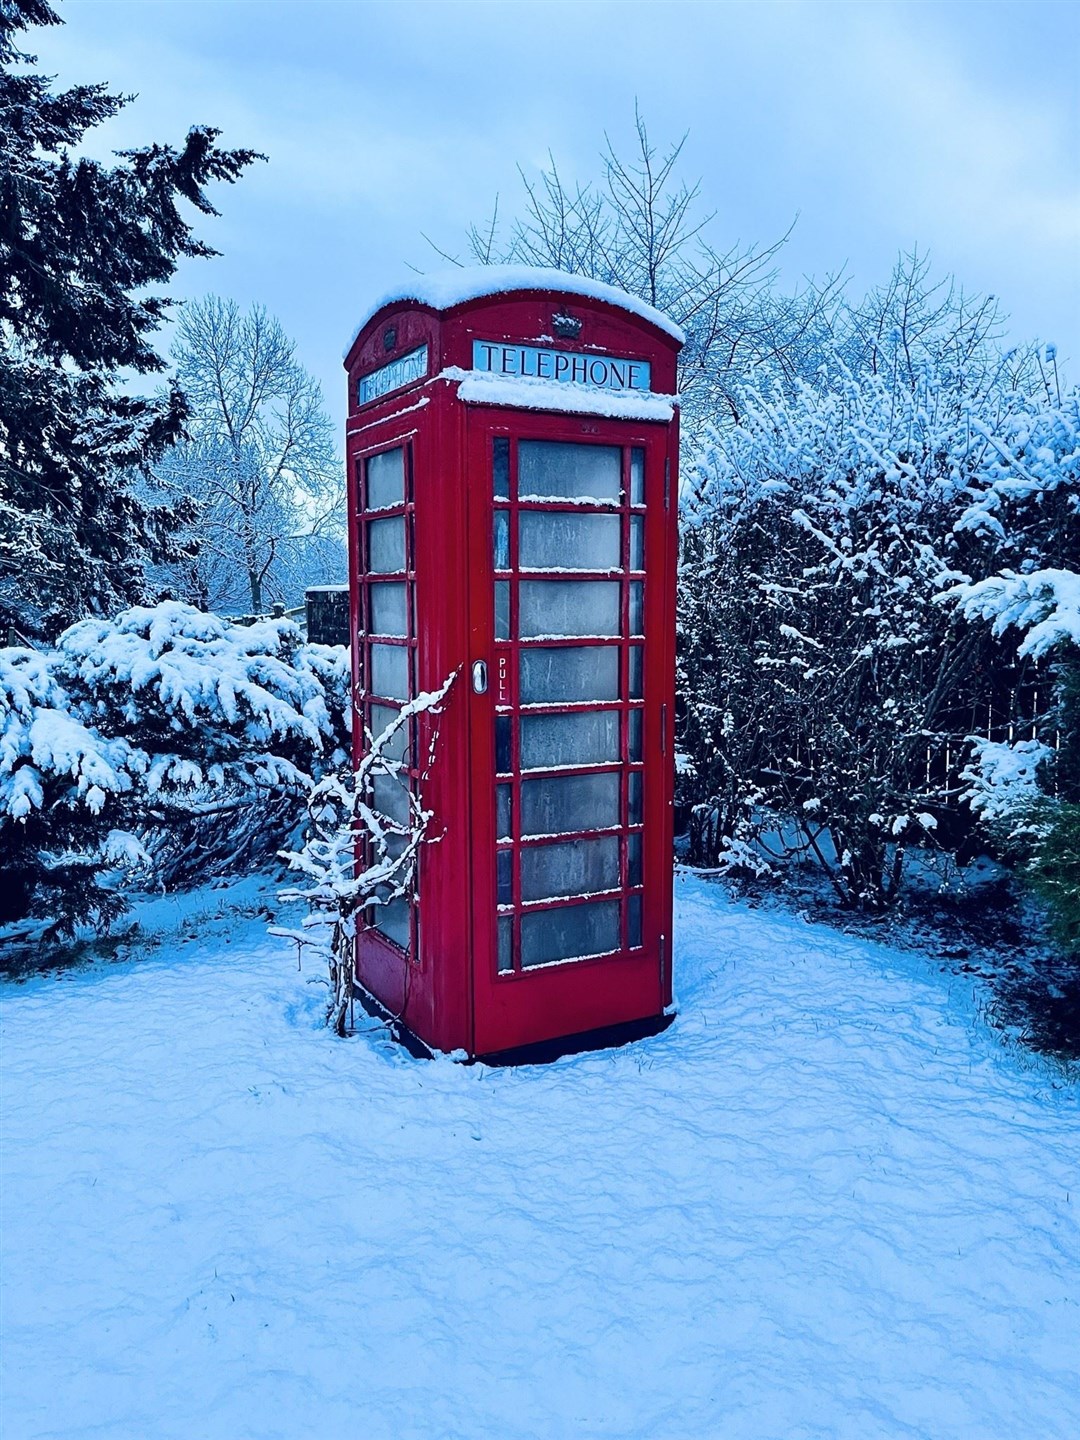 This phone box in Evanton looks like the ultimate spot to make cold calls from. Lorna in Evanton shared this one.